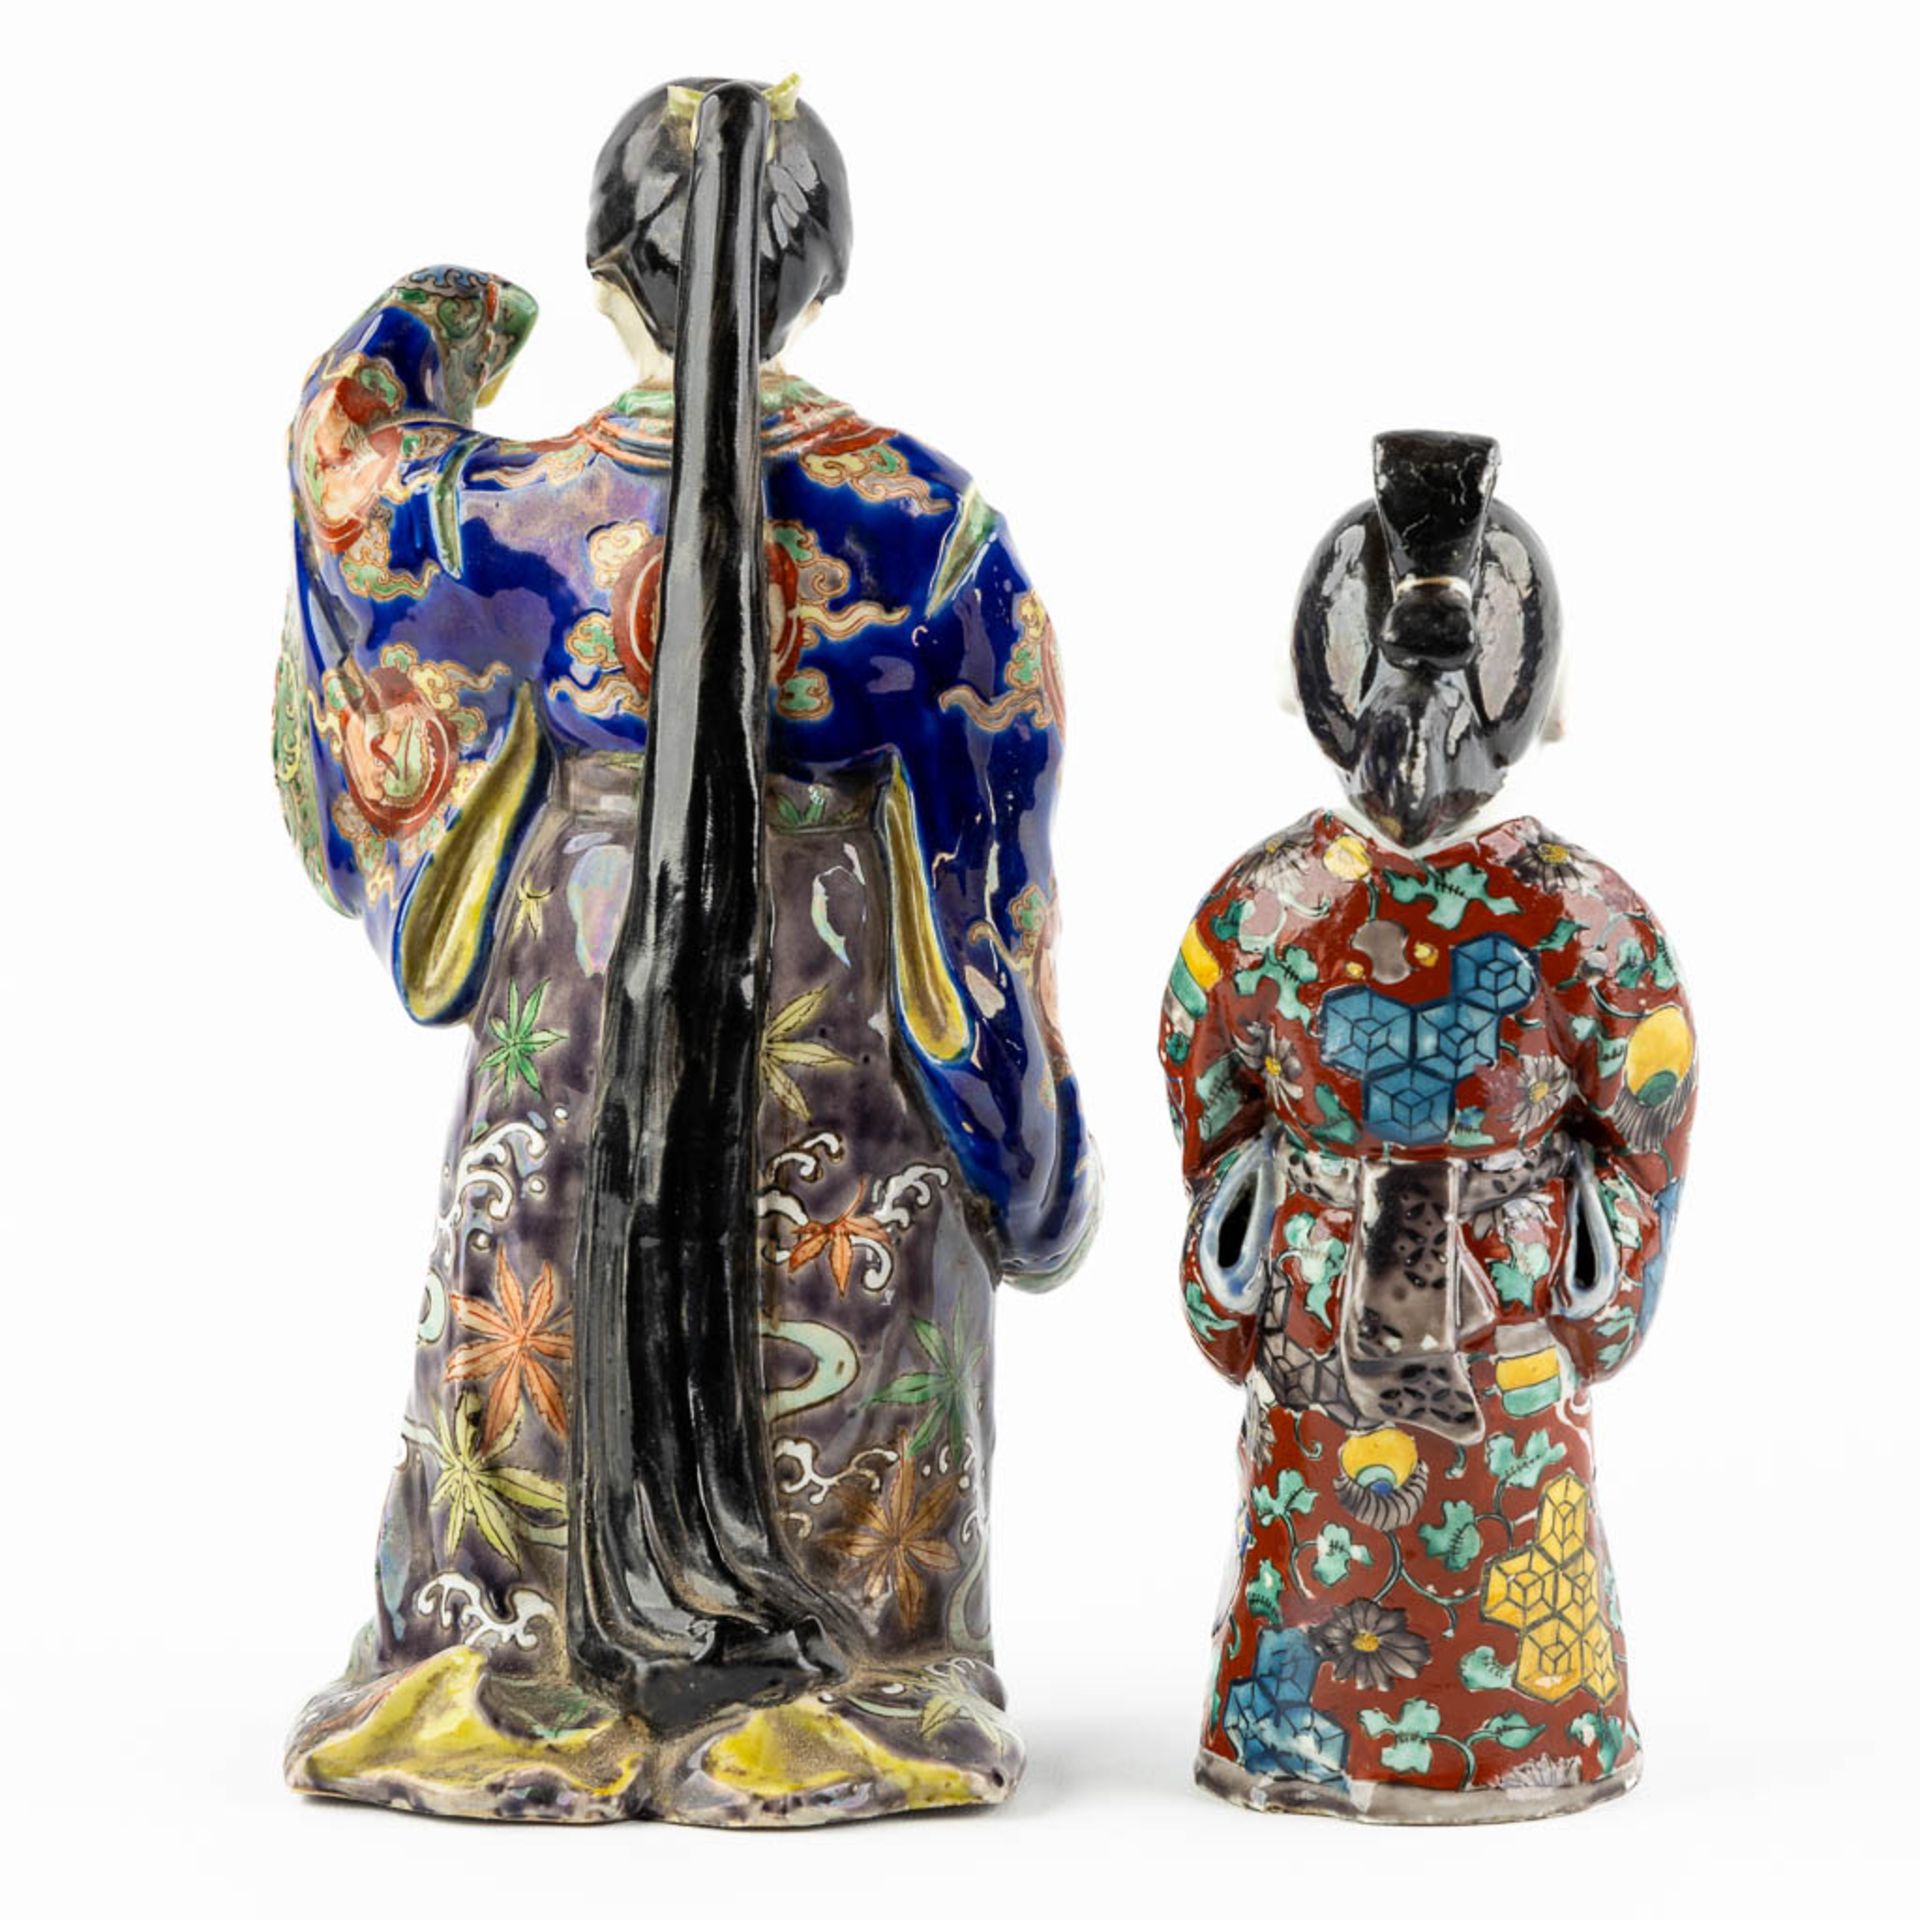 Two Japanese figurines, glazed stoneware. 19th/20th C. (L:14 x W:17 x H:32 cm) - Image 5 of 12